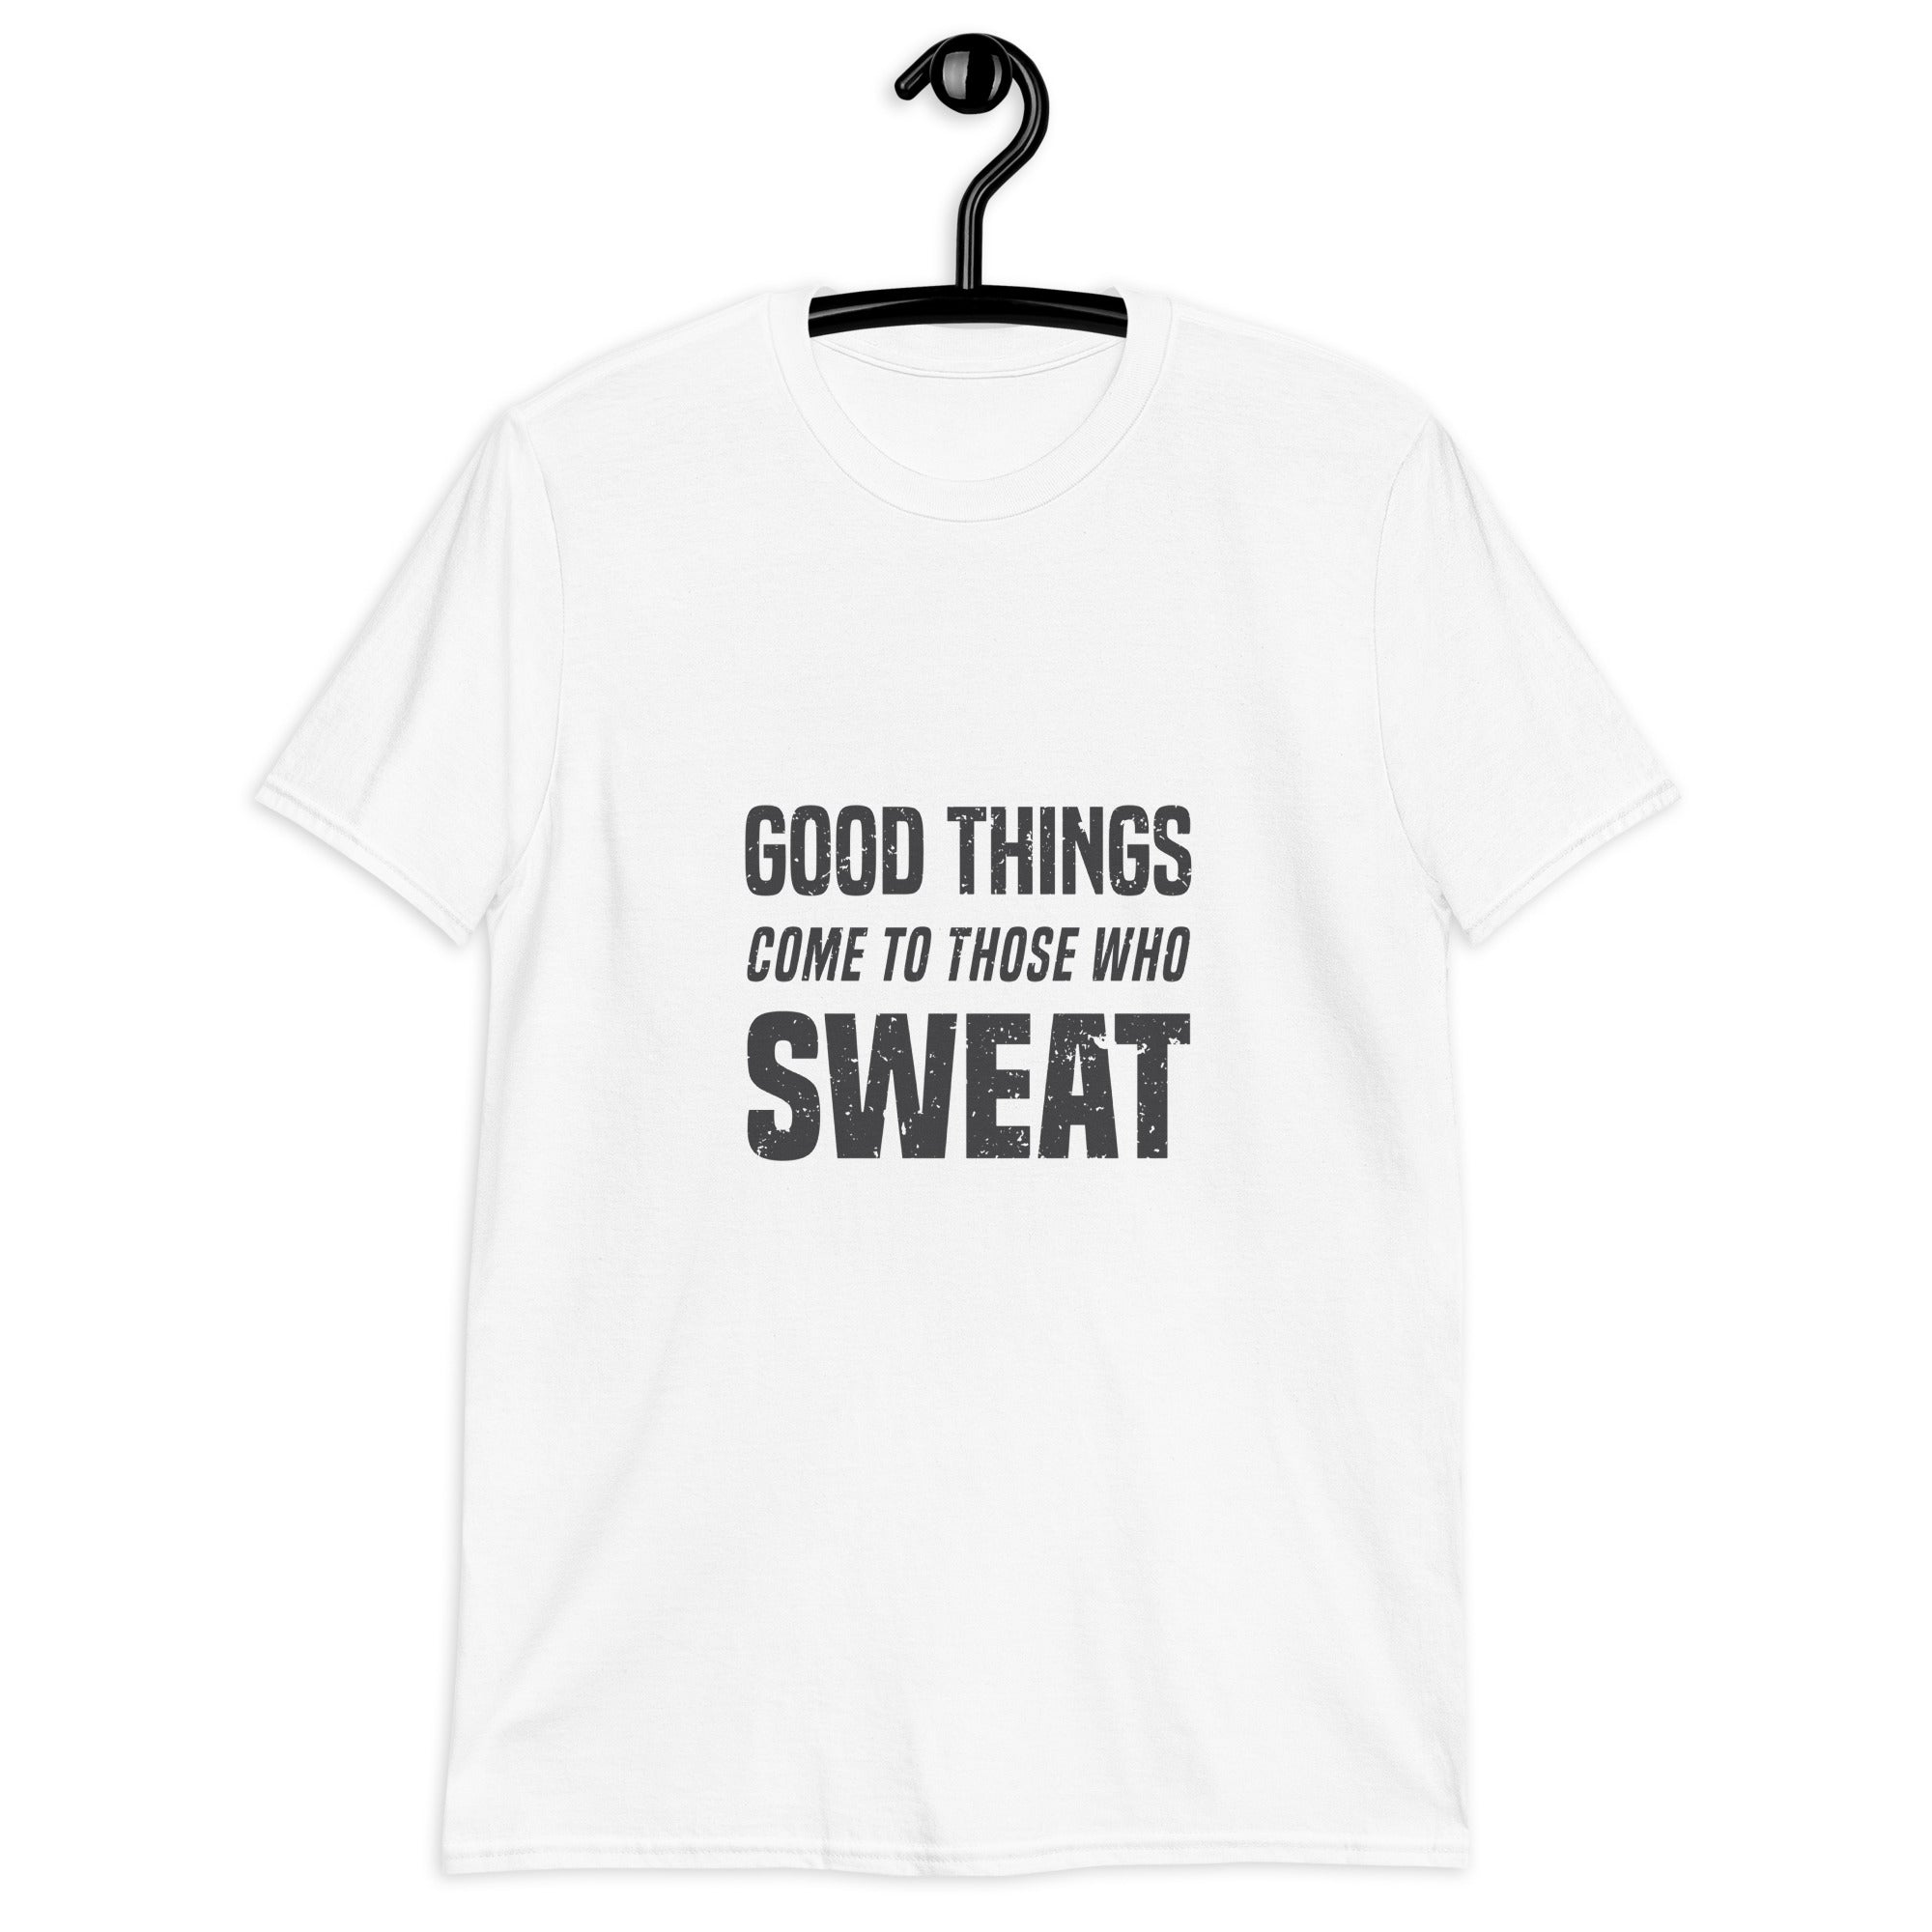 Good things come to those who sweat